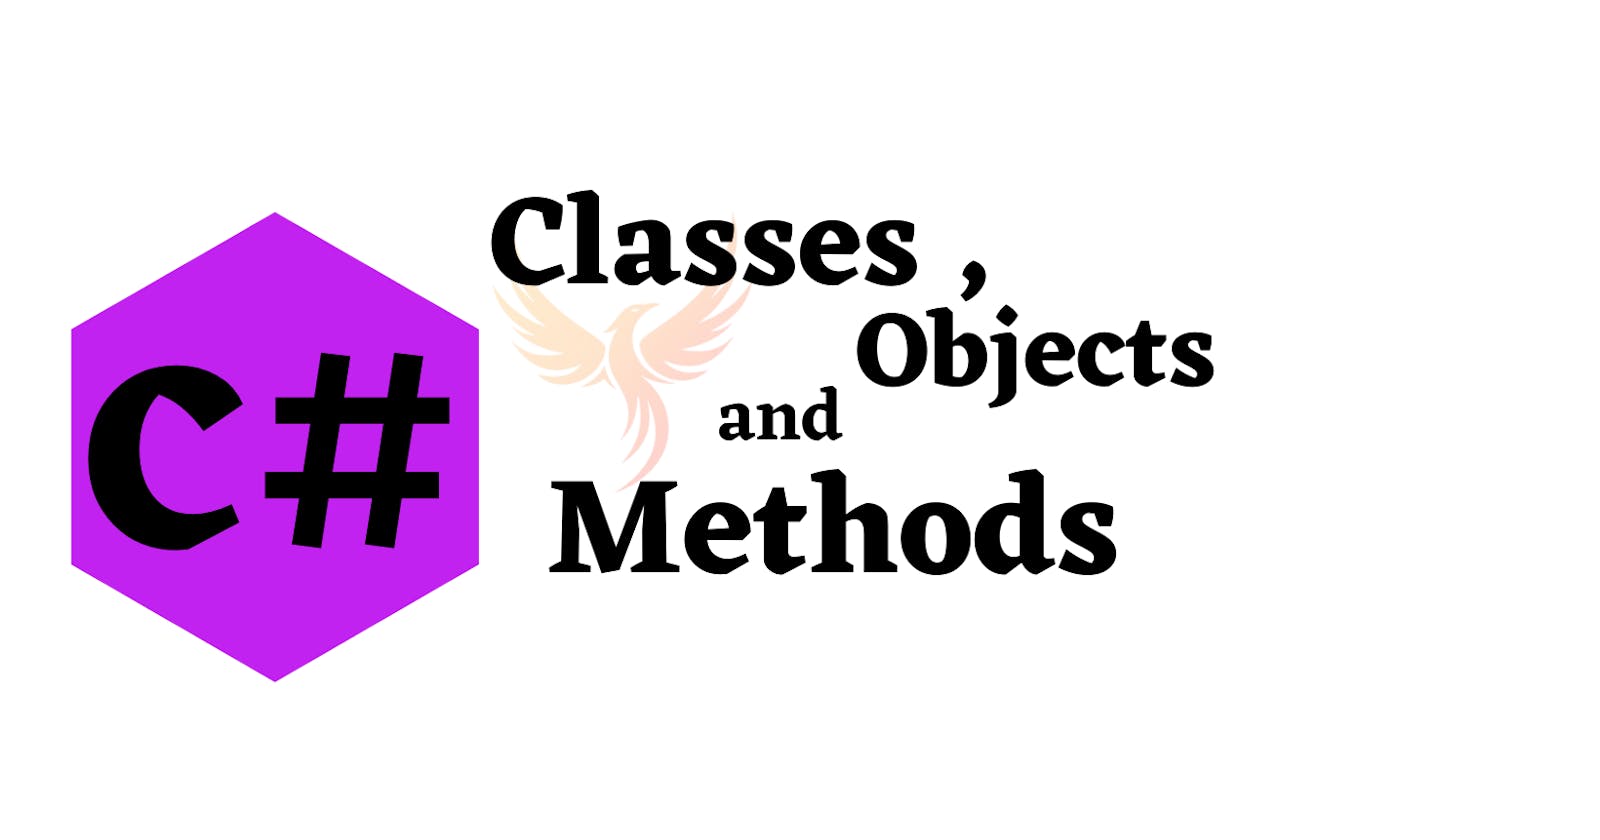 C# Classes ,Objects and Methods.